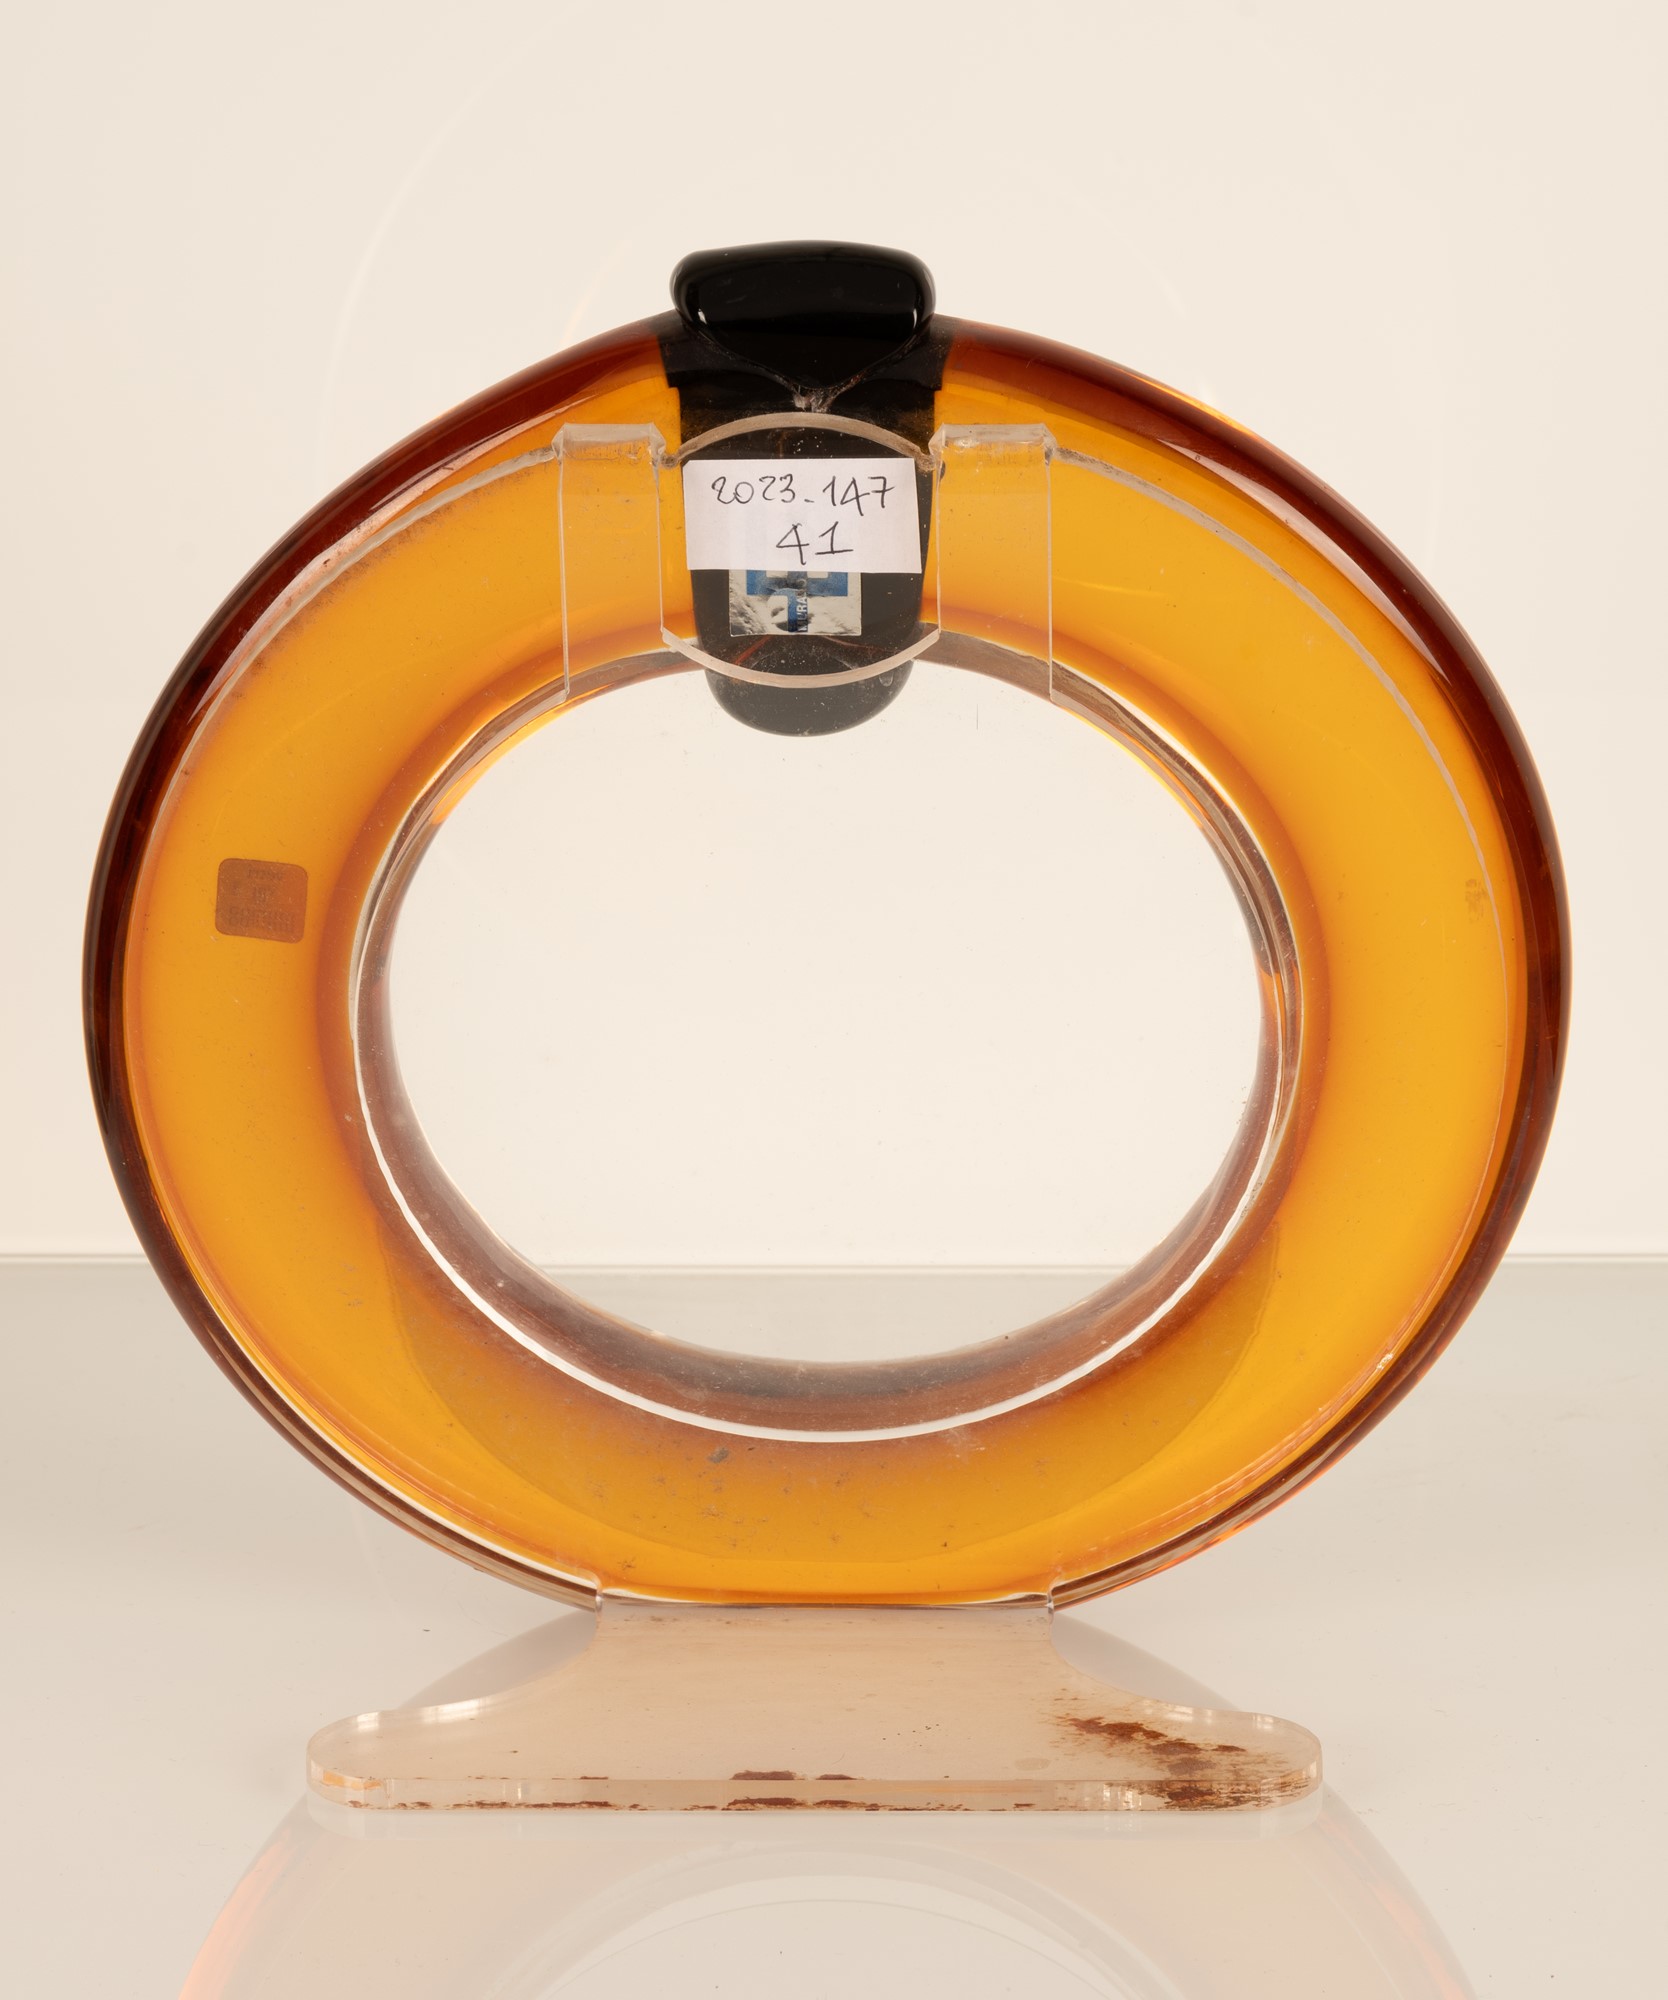 Vintage round photo frame in Murano glass in shades of Amber - Image 9 of 19